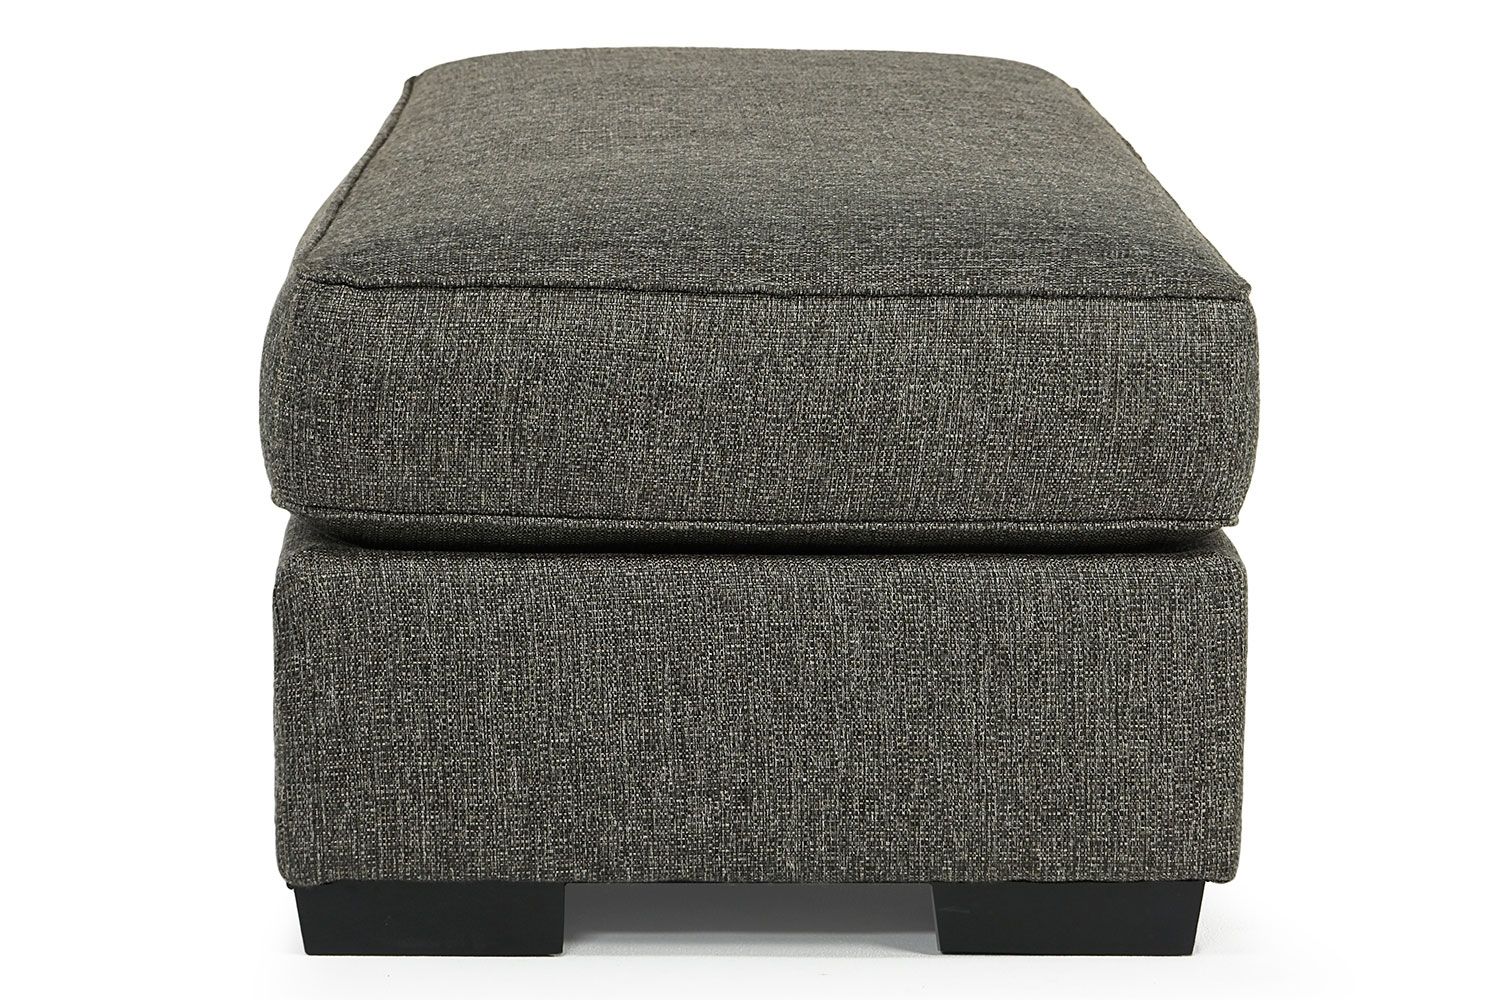 Oracle Ottoman In Titanium | Mor Furniture Pertaining To Ottomans With Titanium Frame (View 7 of 15)